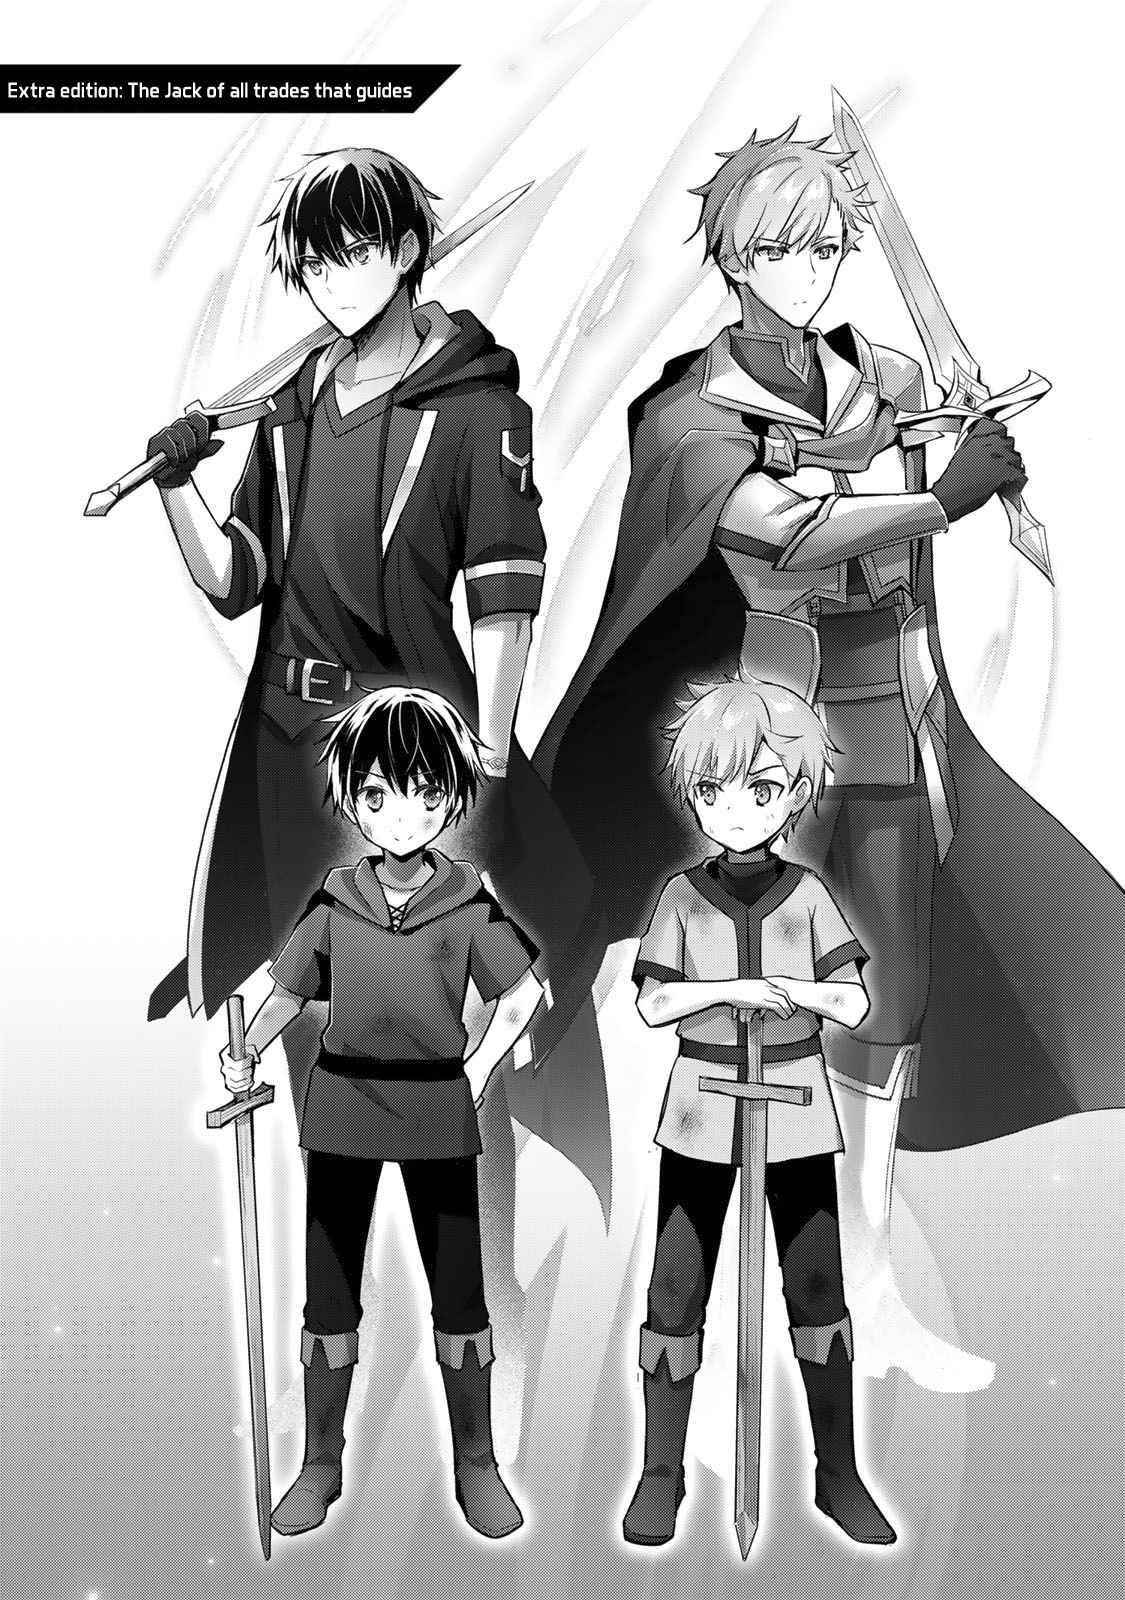 Jack Of All Trades Manga Read Manga The Jack-of-all-trades Kicked Out of the Hero's Party ~ The  Swordsman Who Became a Support Mage Due to Party Circumstances, Becomes All  Powerful - Chapter 3.5